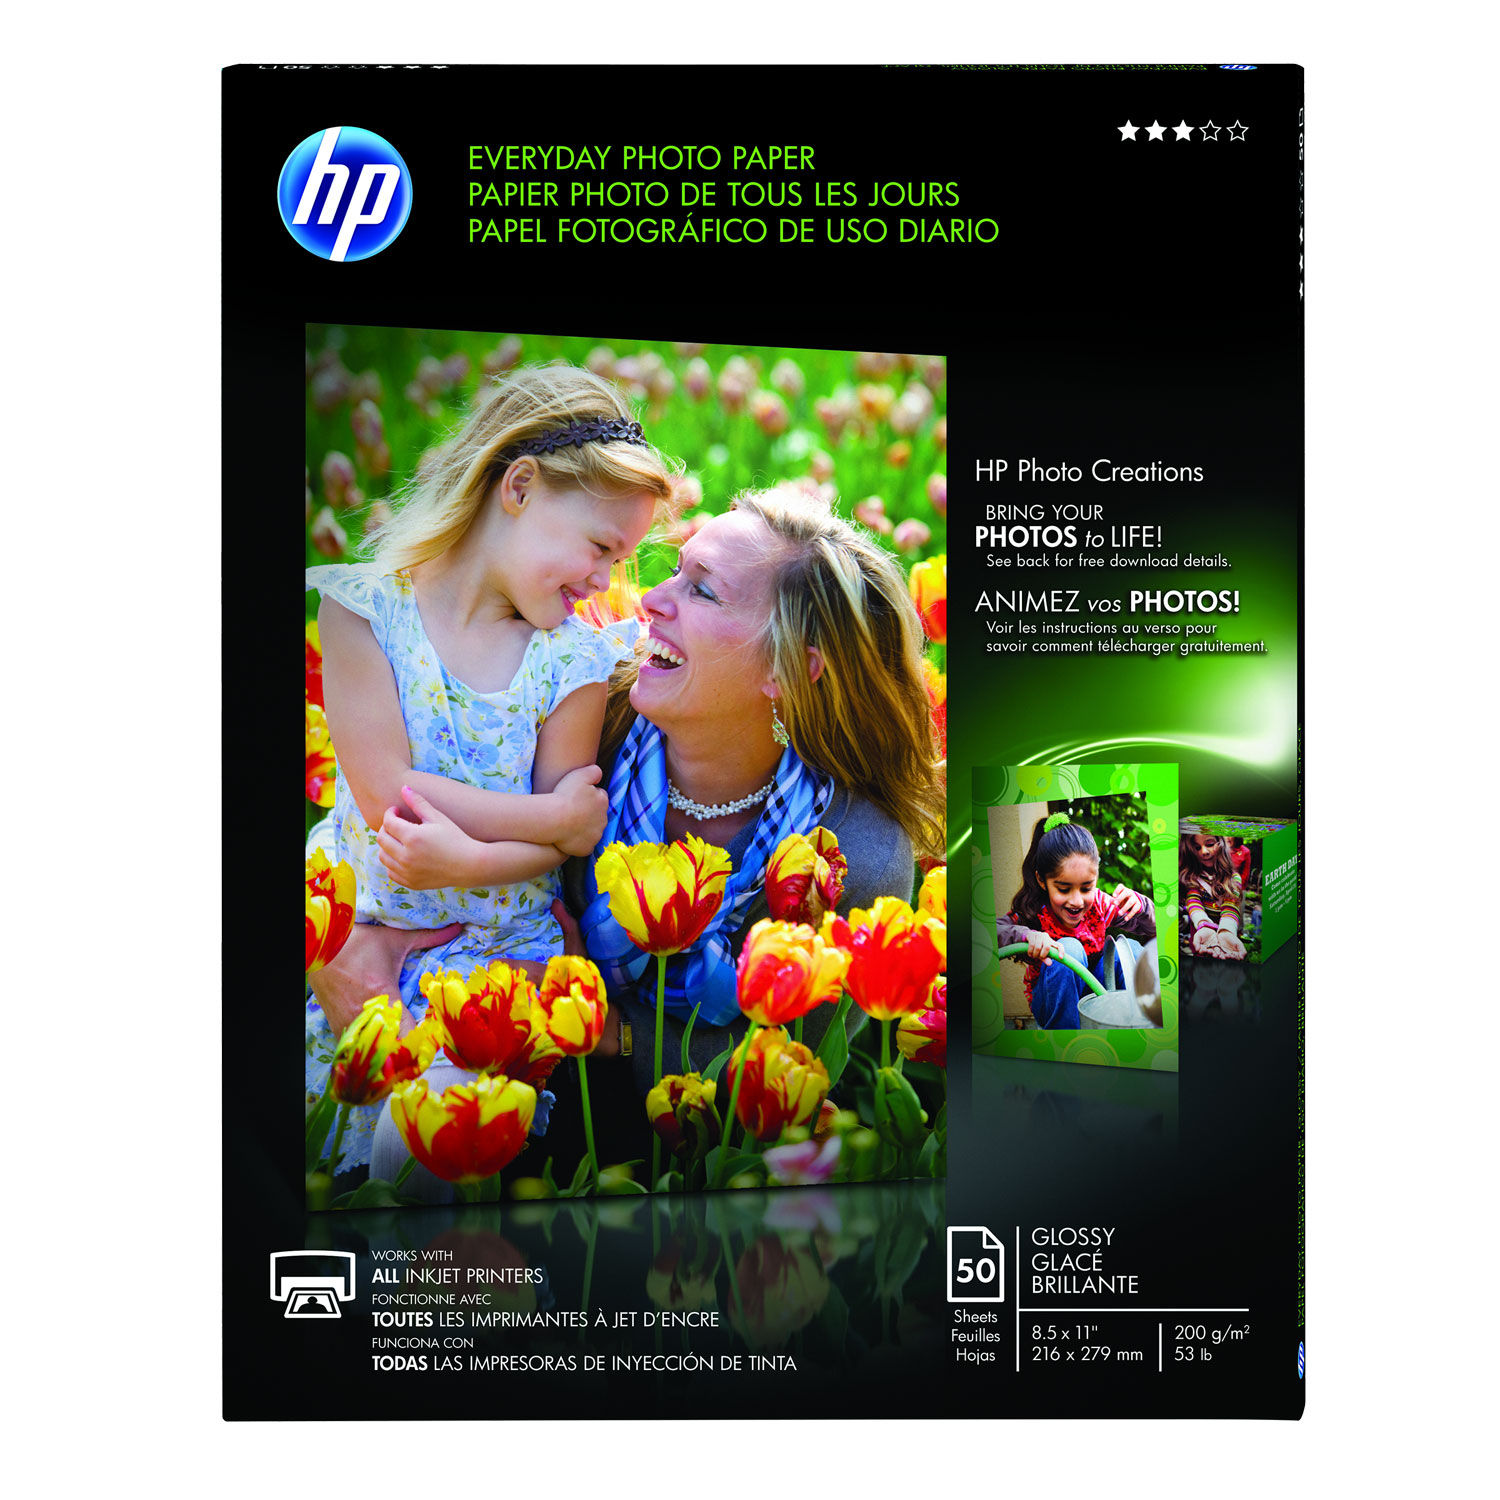 Everyday Photo Paper by HP HEWQ8723A 